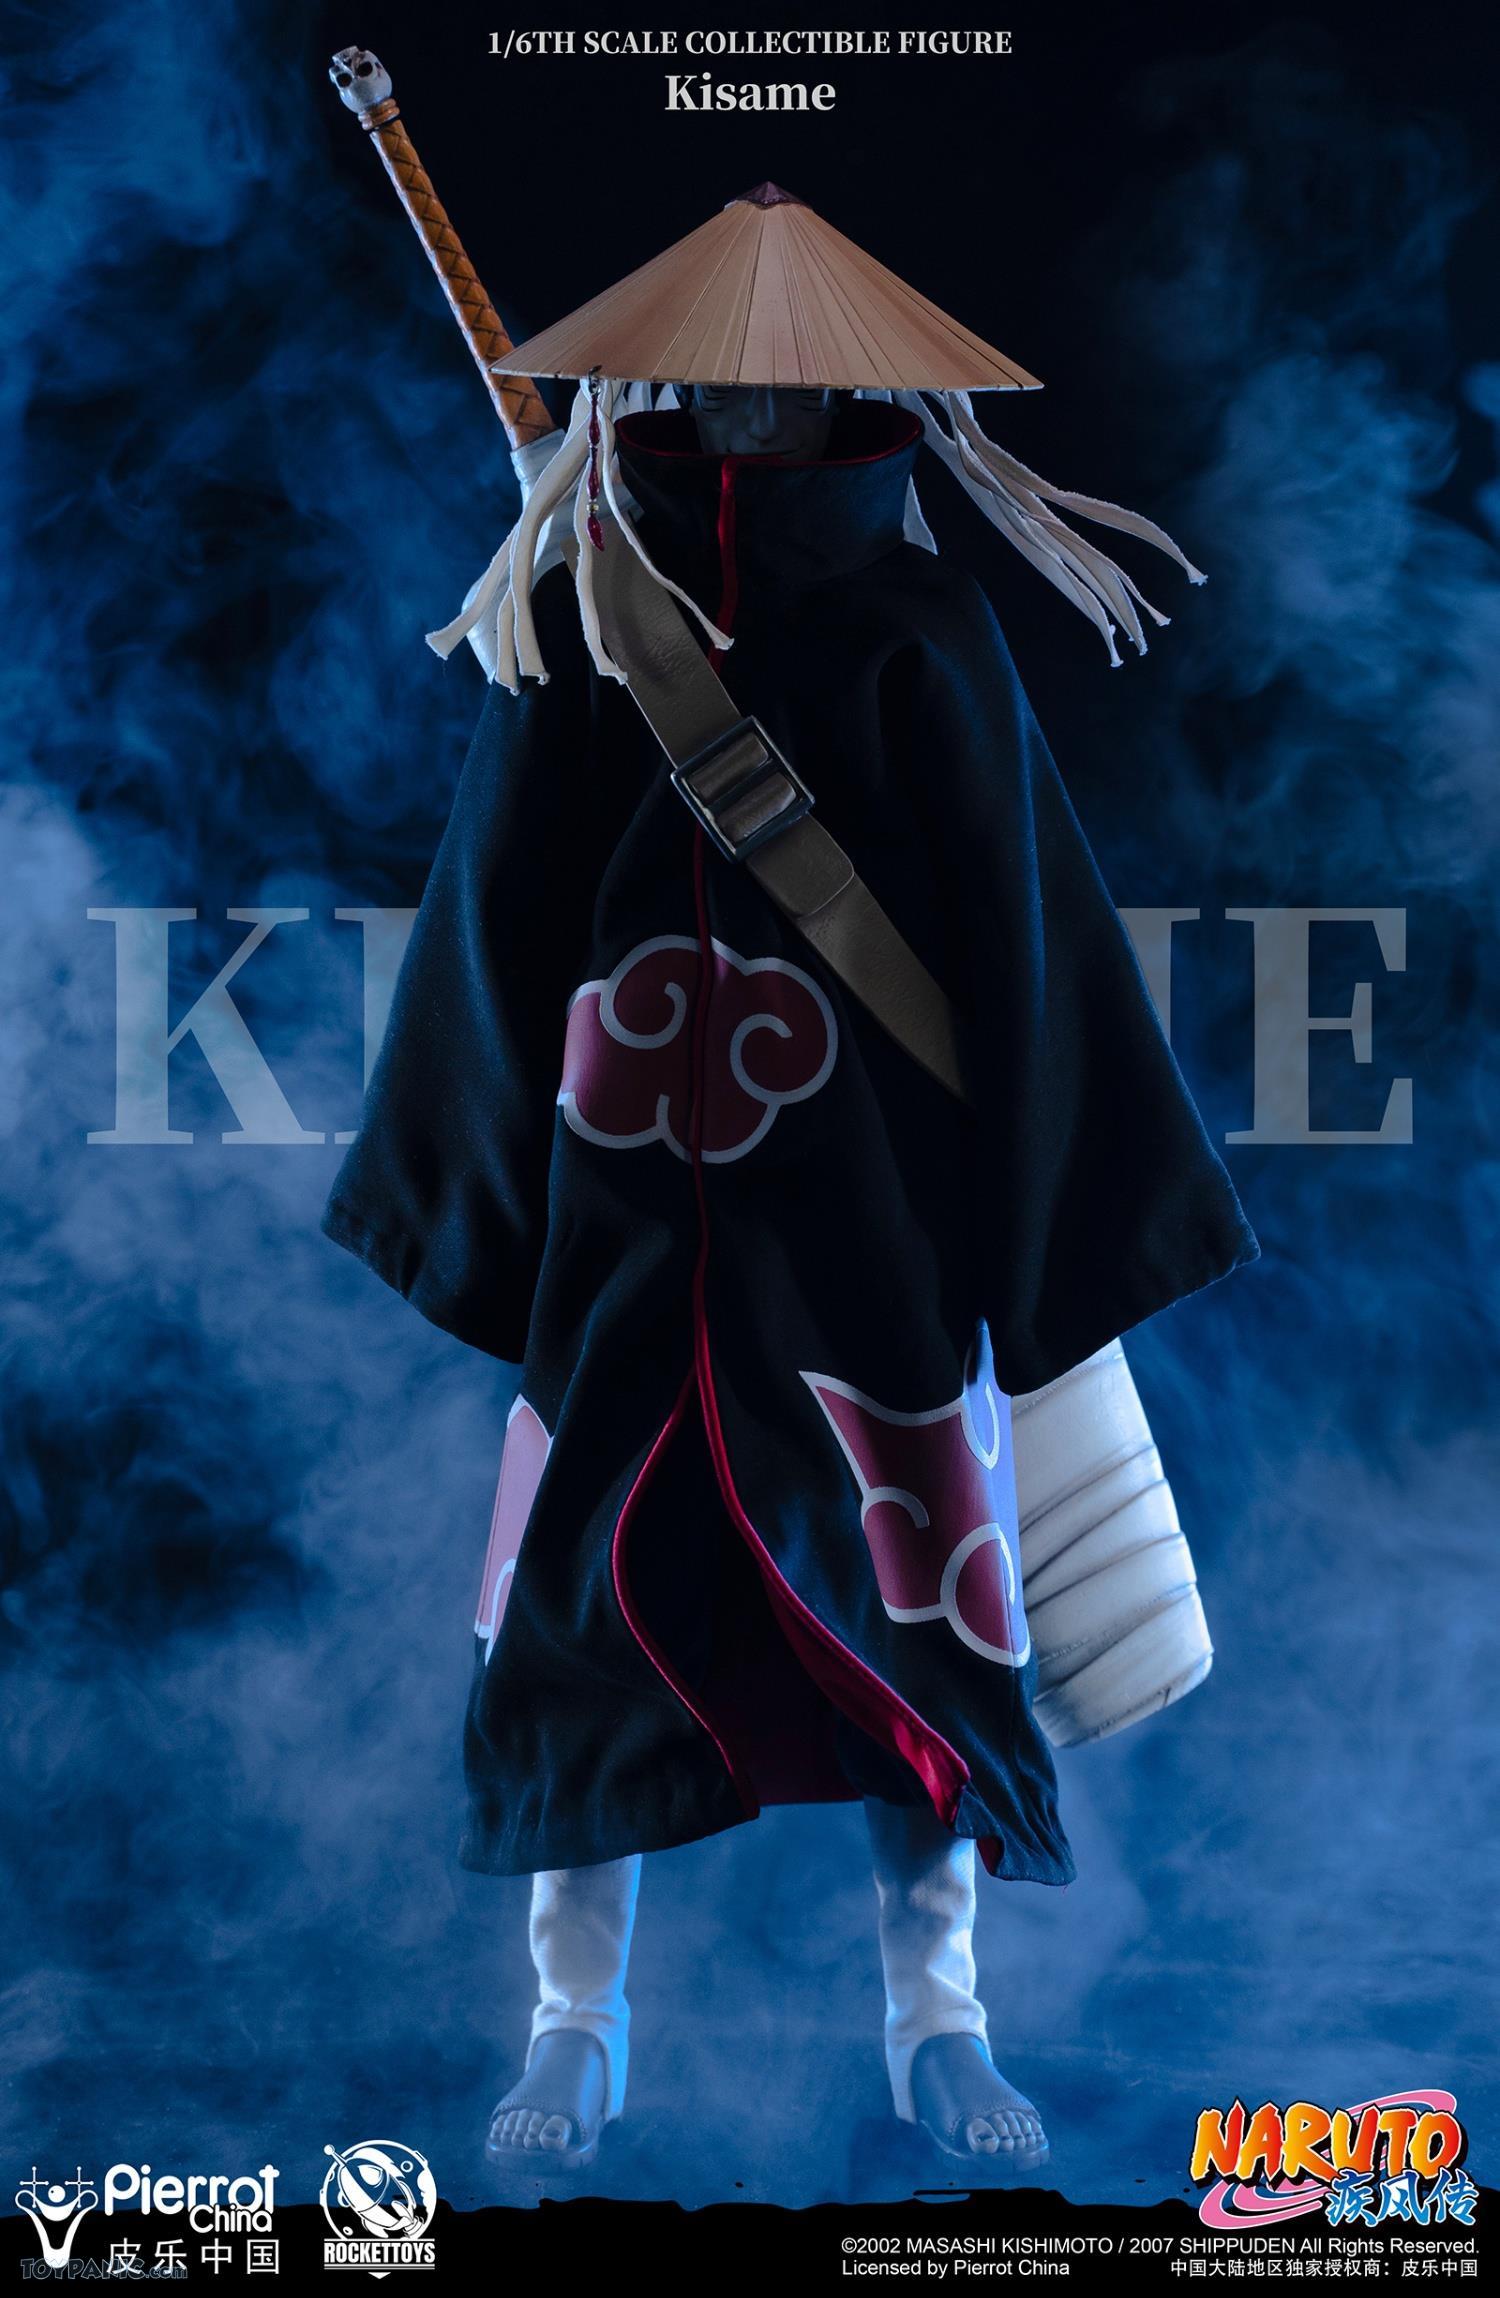 rockettoys - NEW PRODUCT: Rocket Toys ROC-007 1/6 Scale Kisame 221202460438PM_9230500